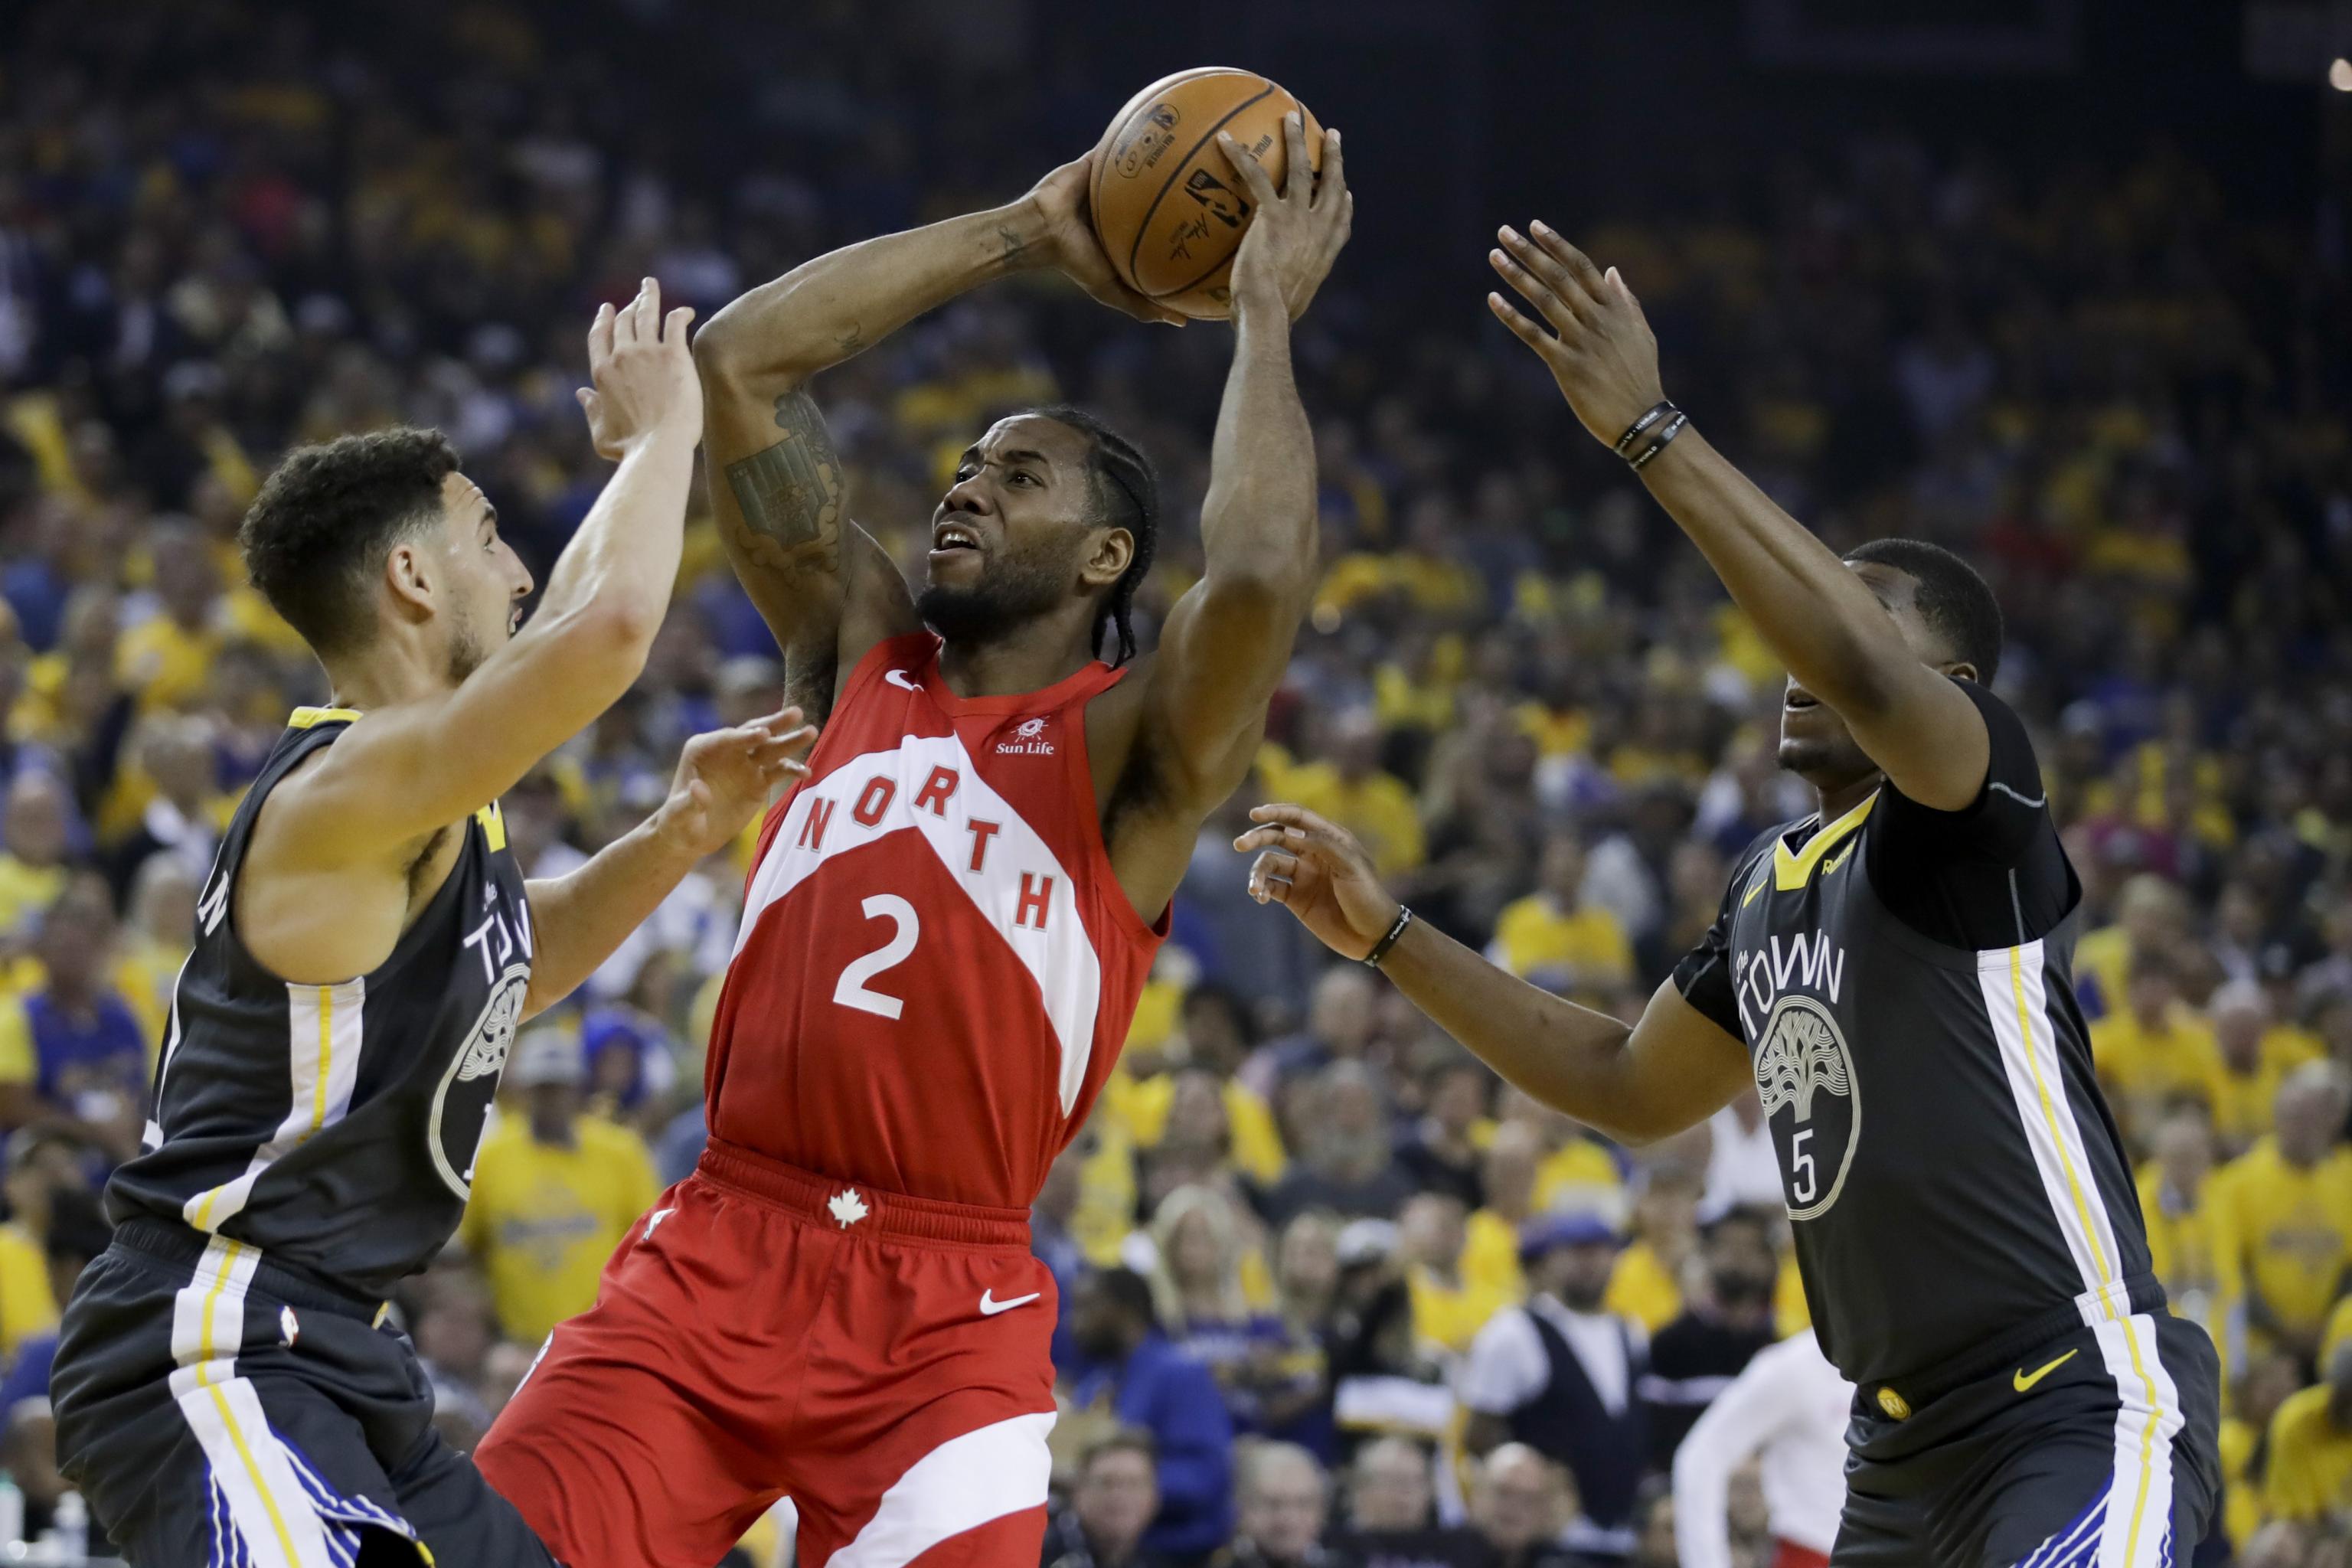 Raptors Vs Warriors Game 5 Tv Schedule Live Stream Guide For 2019 Nba Finals Bleacher Report Latest News Videos And Highlights